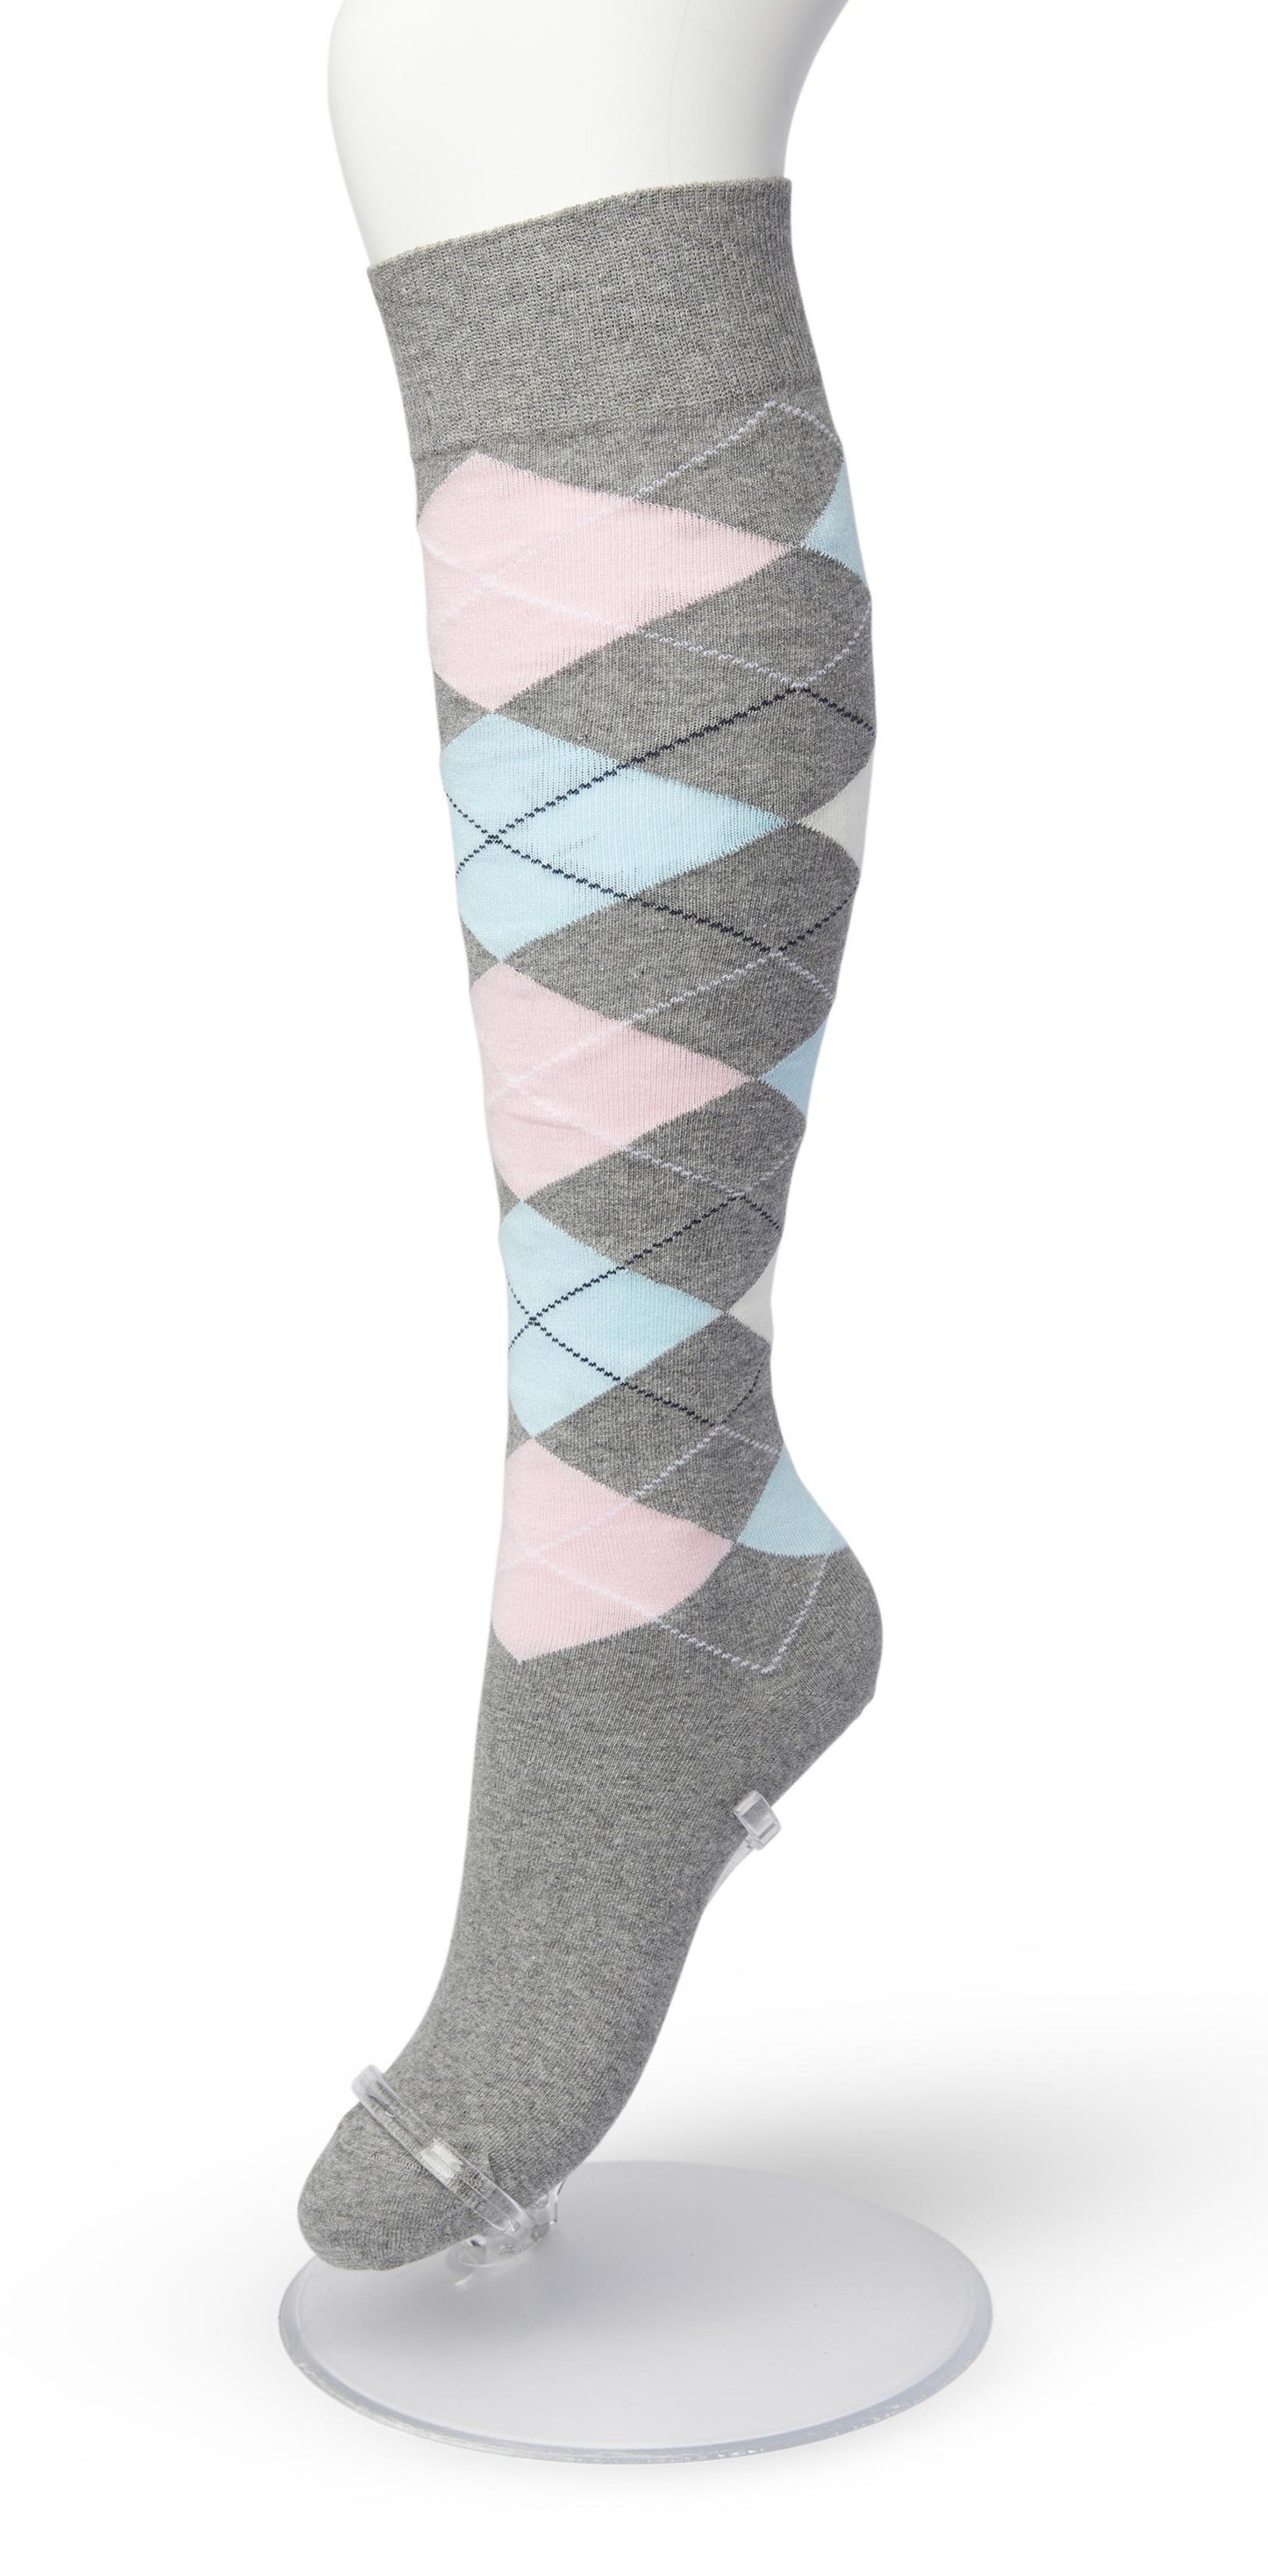 Bonnie Doon BP211505 Argyle Knee-highs - Golf style knee-high socks with a diamond argyle tartan check pattern in light grey, baby pink and pale blue.